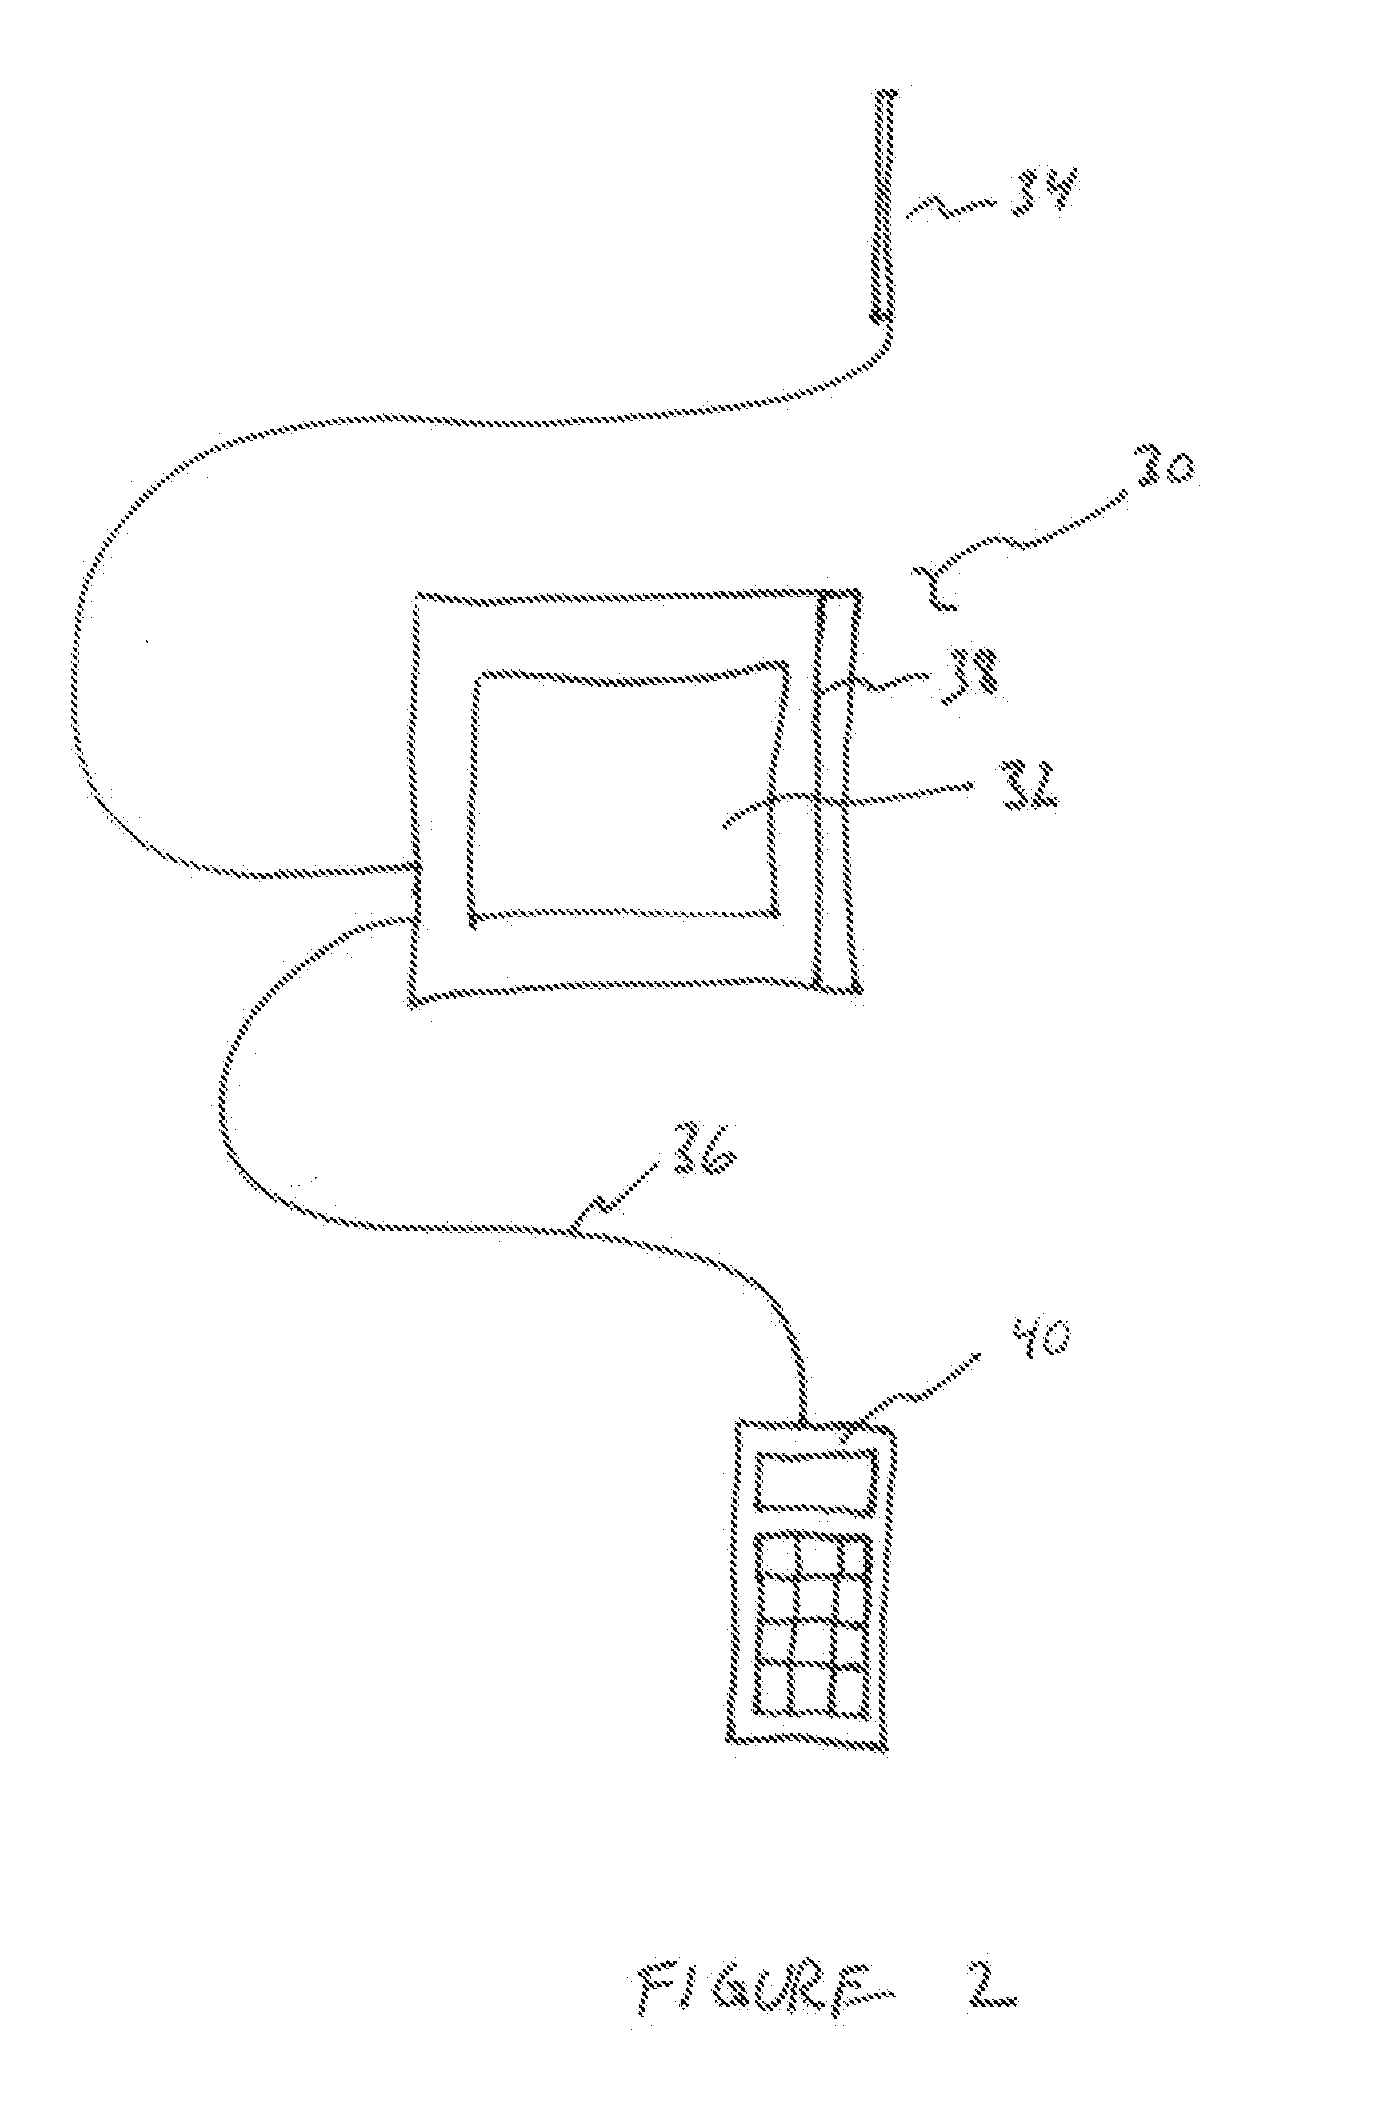 System for protecting pin data when using touch capacitive touch technology on a point-of-sale terminal or an encrypting pin pad device